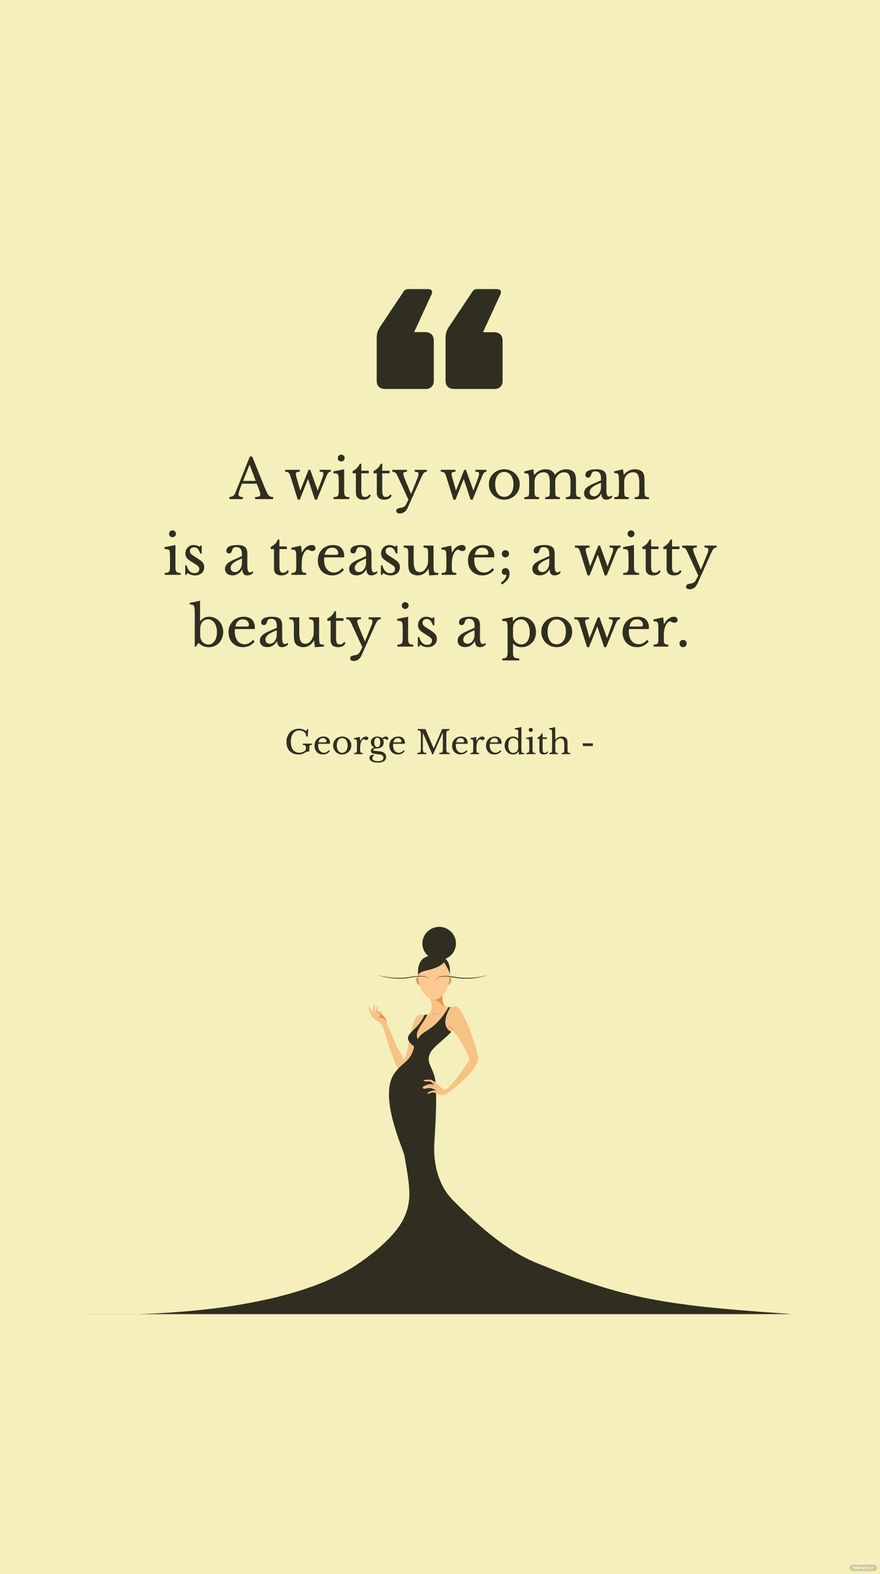 Free George Meredith - A witty woman is a treasure; a witty beauty is a power. in JPG